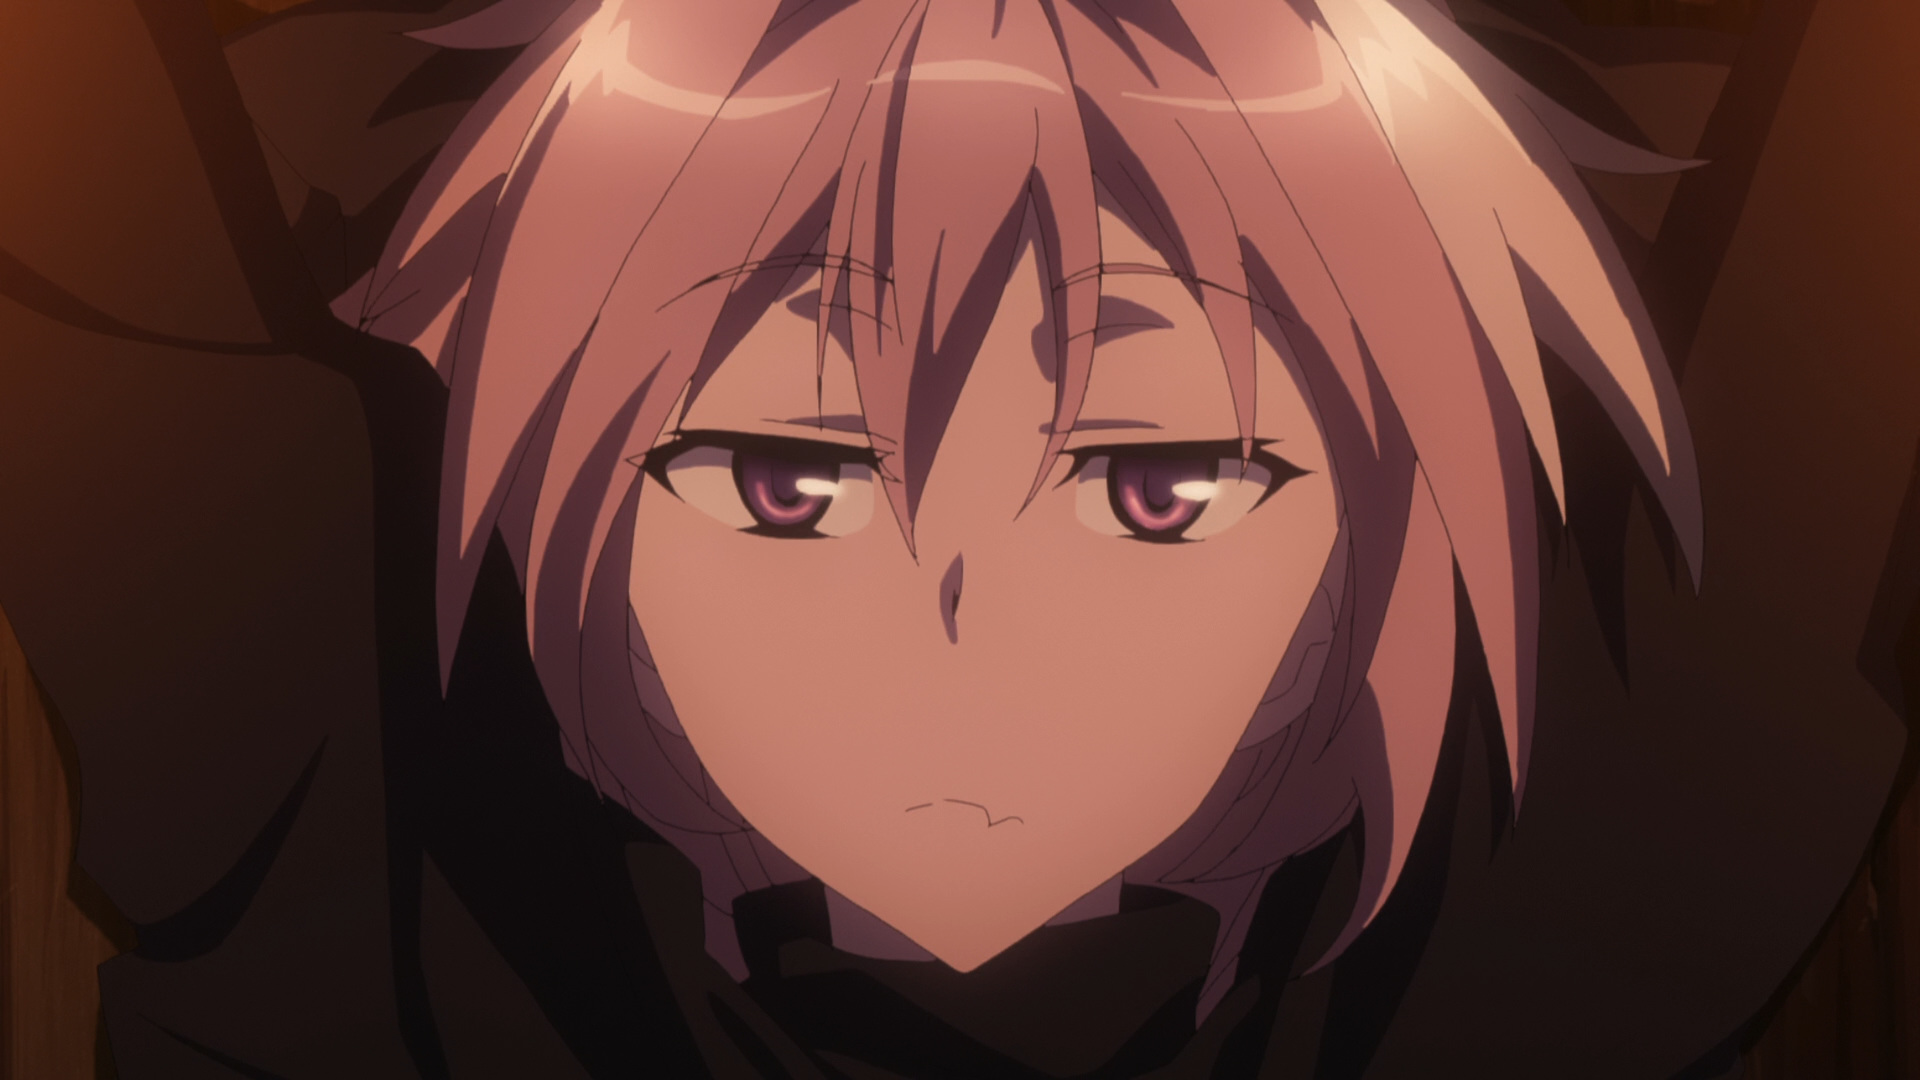 It’s honestly rather interesting what Fate/Apocrypha did with their main ch...